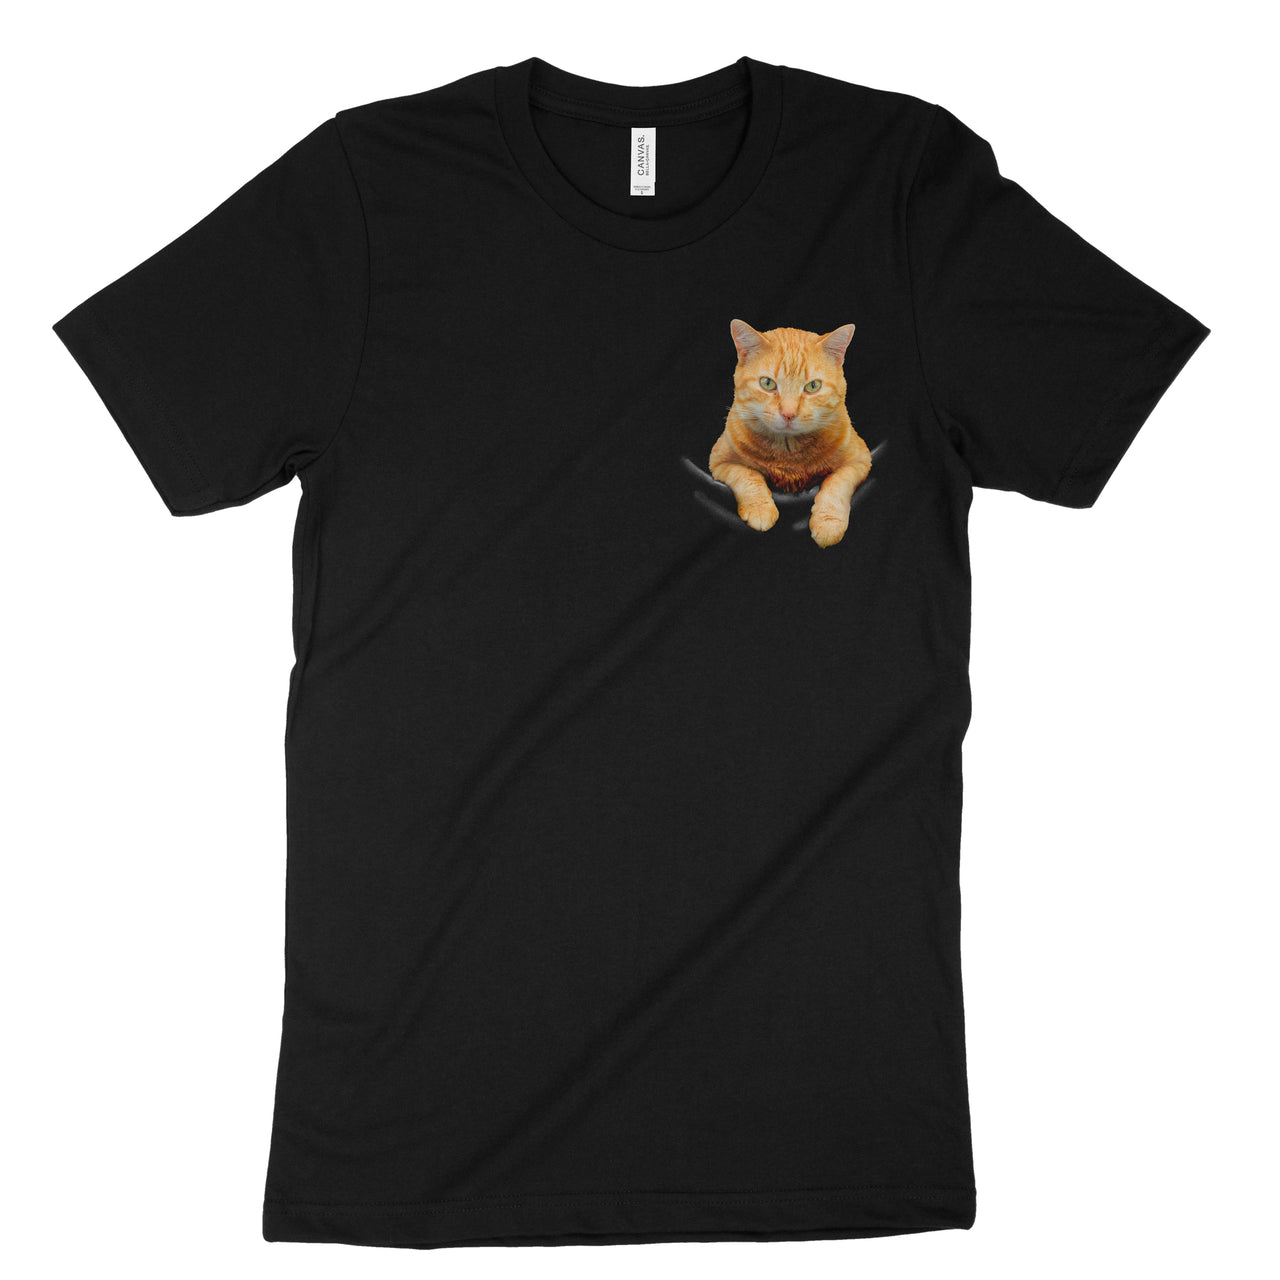 Cat in a Pocket T-Shirt